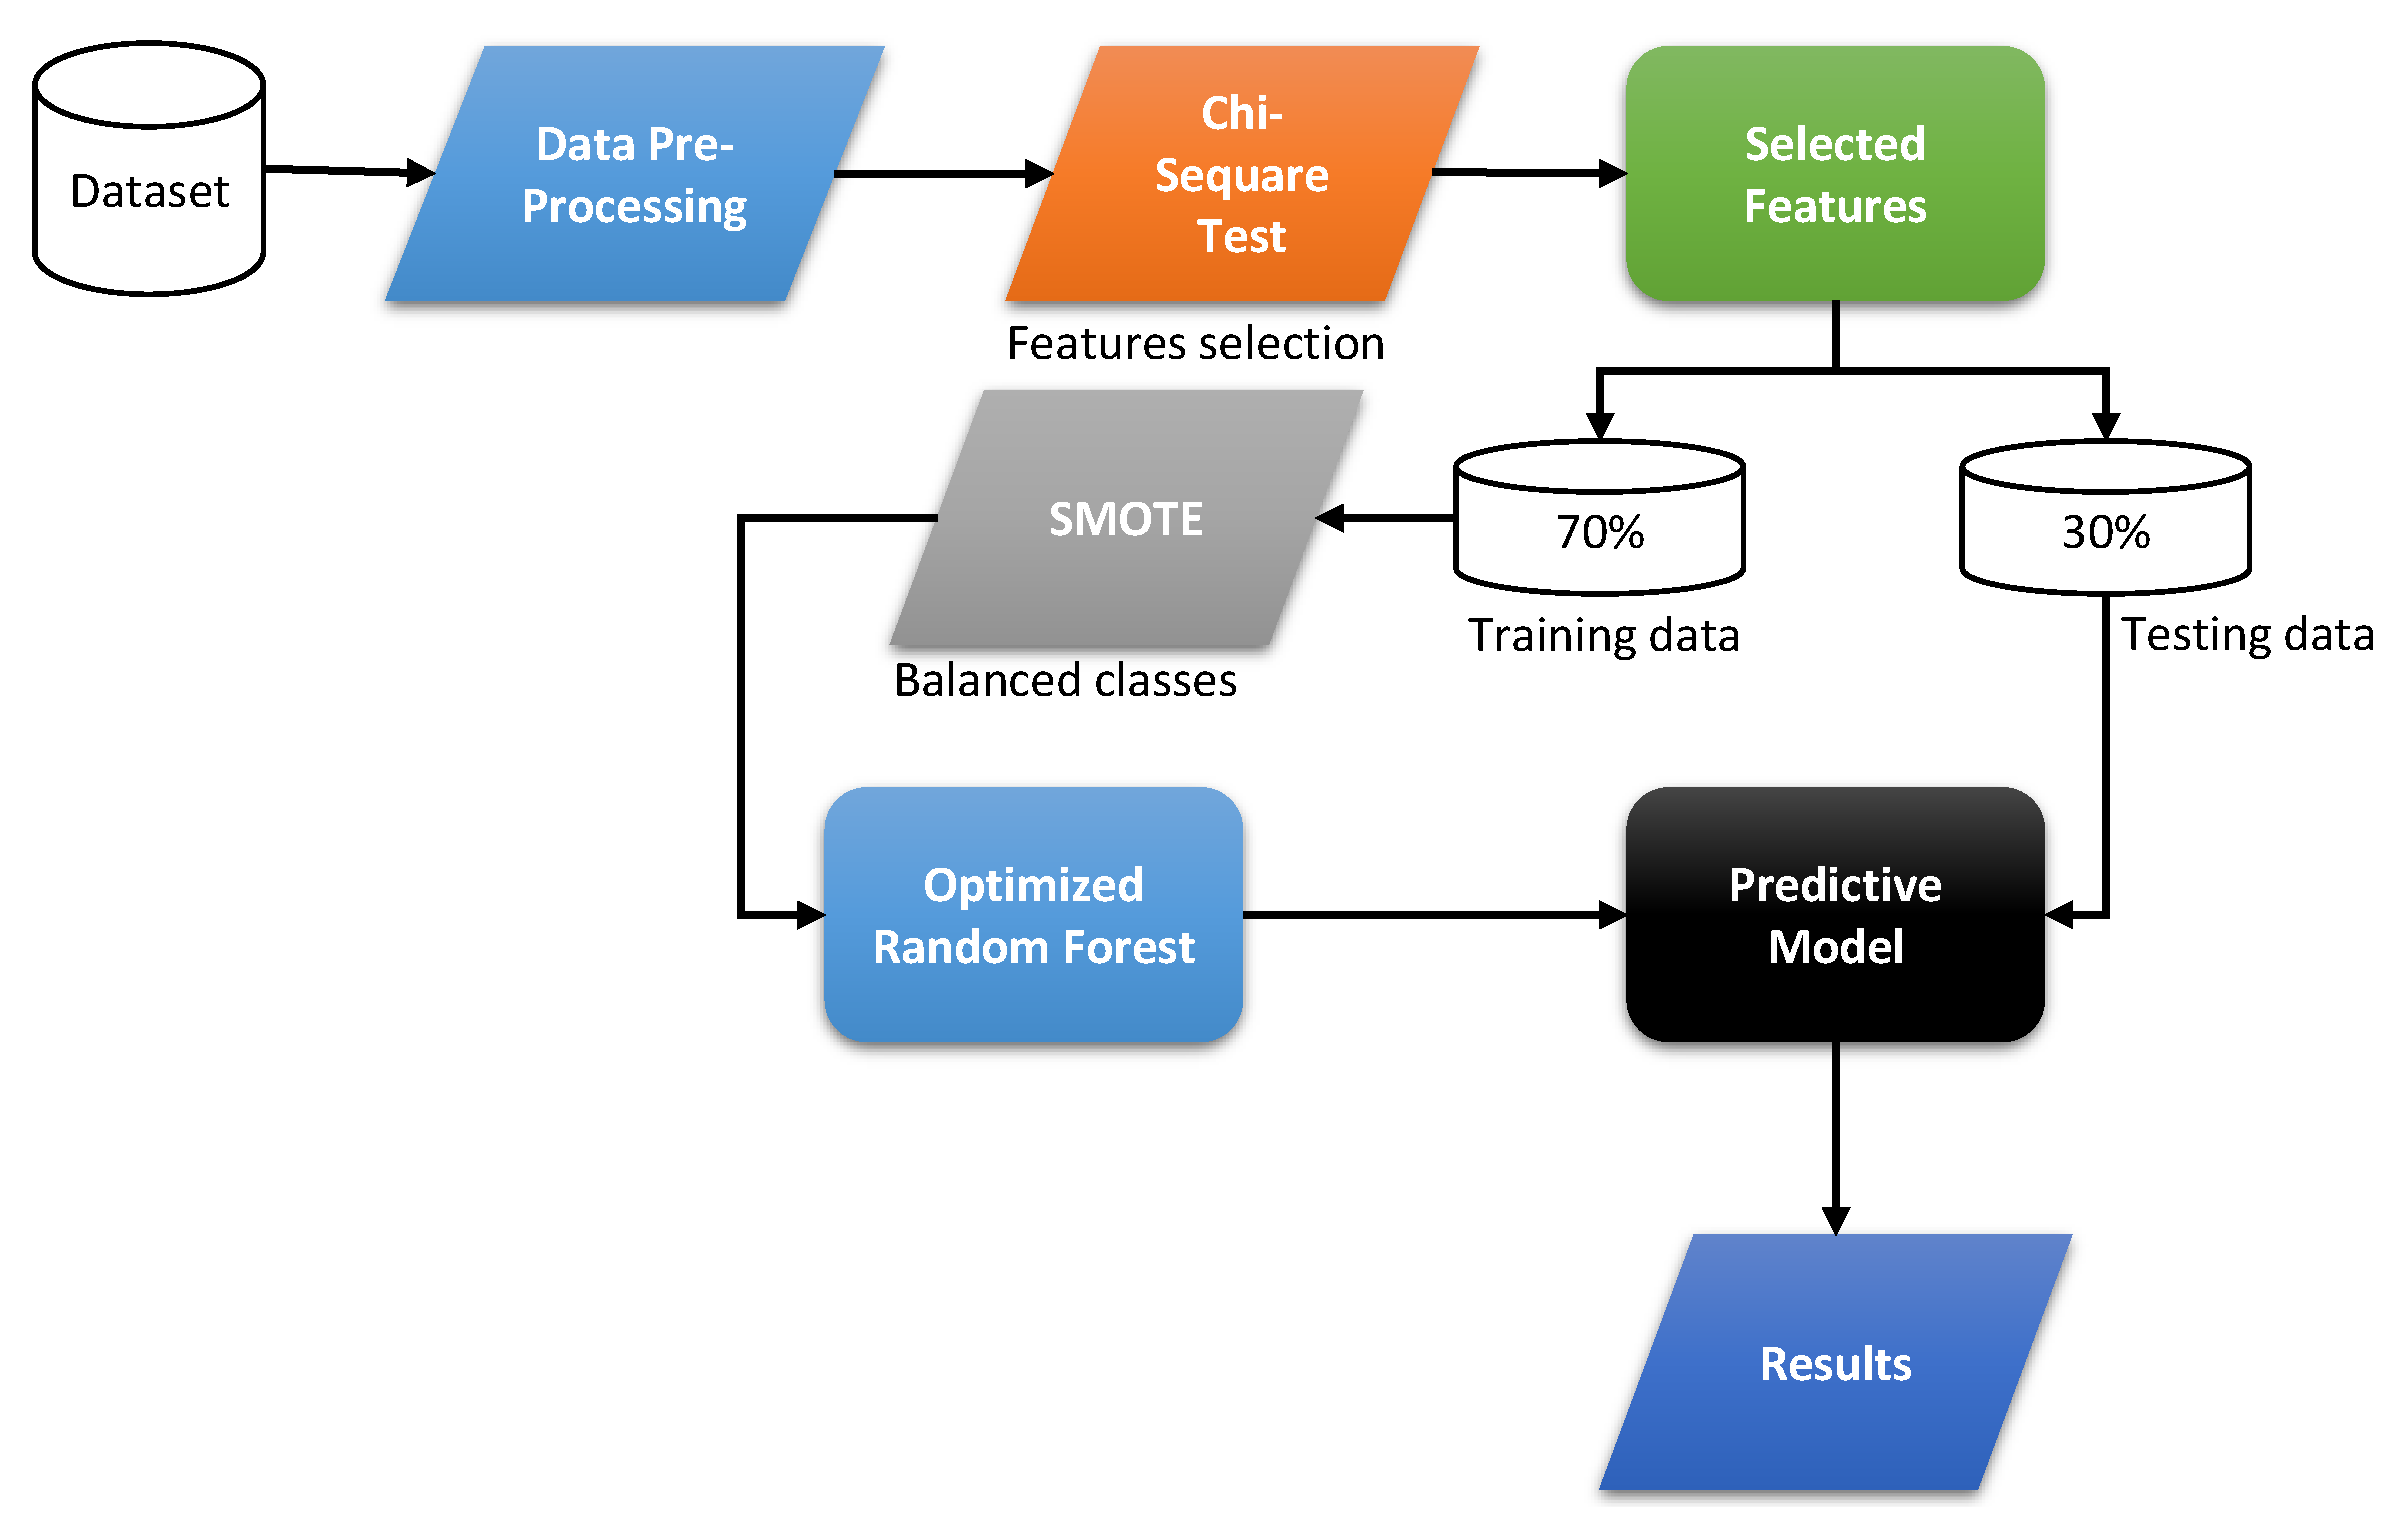 Decision Support System for Predicting Mortality in Cardiac Patients Based on Machine Learning